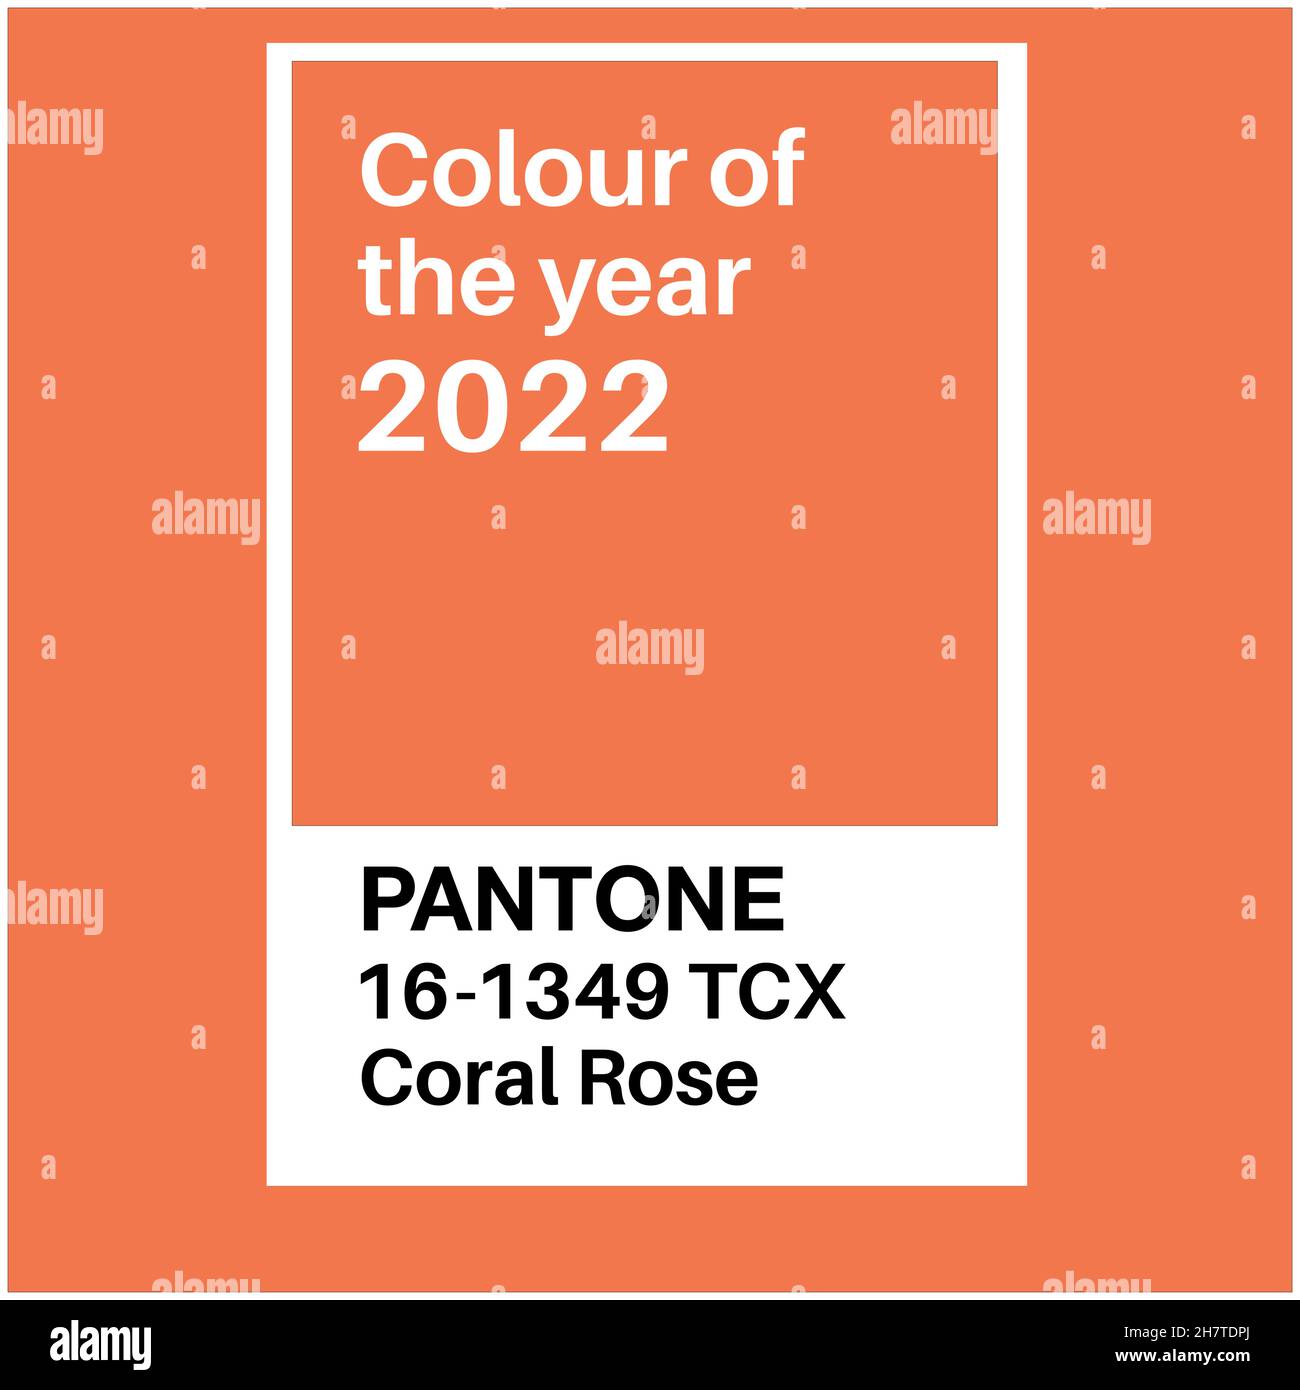 SWINDON, UK - NOVEMBER 19, 2021: Pantone Coral Rose Trending Color of the Year 2022. Color pattern, vector illustration Stock Vector